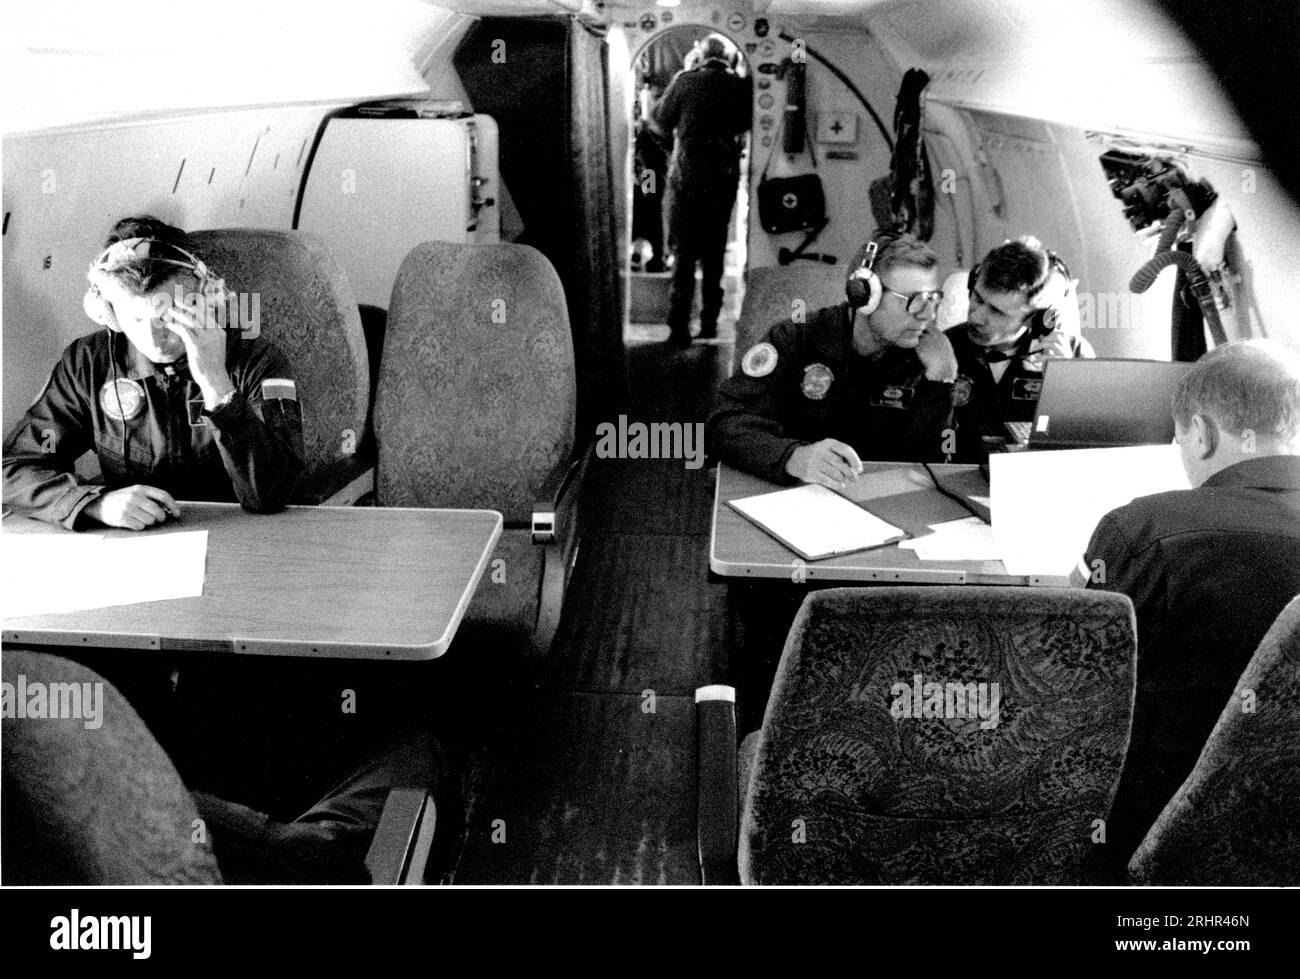 Unique pictures on a Russian military intelligence flight over the UK, under the Open Skies Treaty. April 1999, aboard an Antonov 30B aircraft. Russian crew, one UK journalist allowed aboard. Took off from RAF Brize Norton, Oxfordshire. Four hours in the air. The Russians flew over, photographed and mapped military, intel and civil sites across England, from USAF and RAF bases in East Anglia, the GCHQ intel gathering HQ in Cheltenham, power stations, transport hubs, naval bases at Portland and Portsmouth. Putin withdrew Russia from the Open Skies Treaty in 2021. Pic: Russian Air Force officers Stock Photo